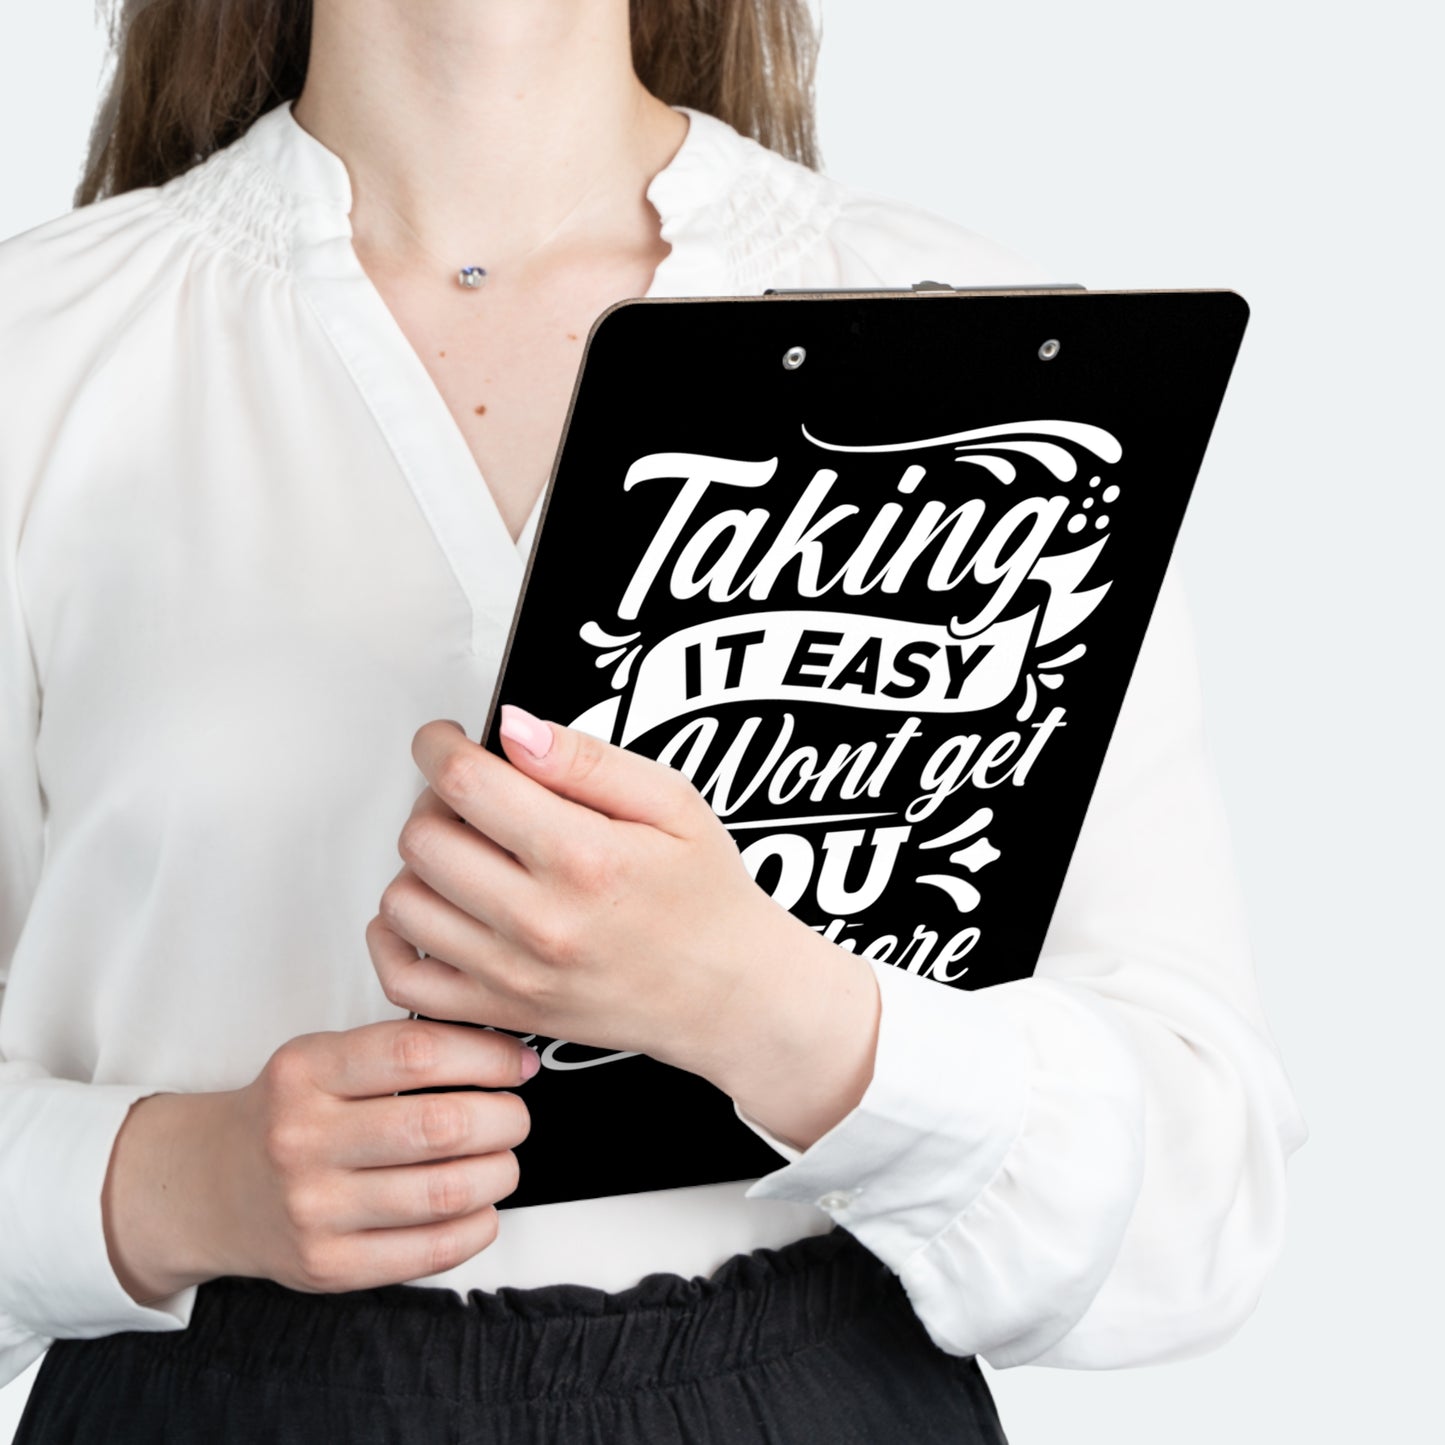 Motivational Taking it Easy will Get You Nowhere Clipboard